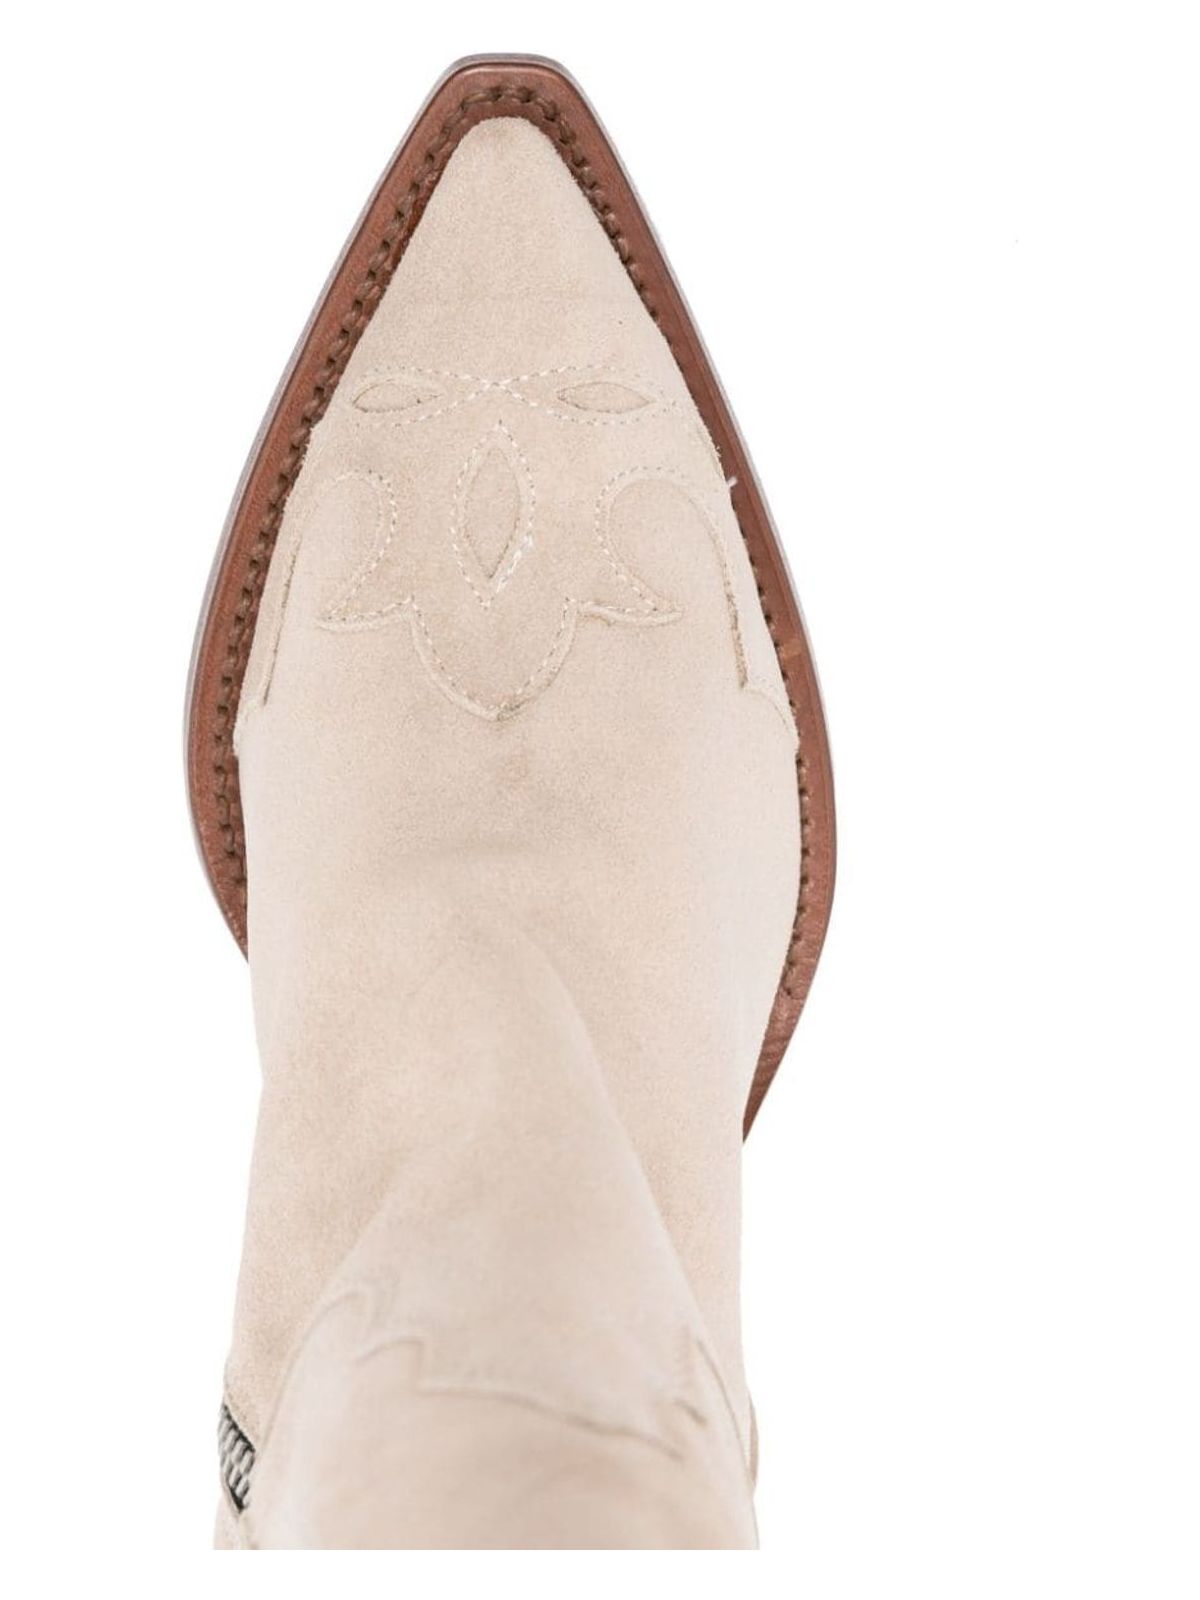 SUEDESAND SONORA SUEDE TEXAN BOOTS